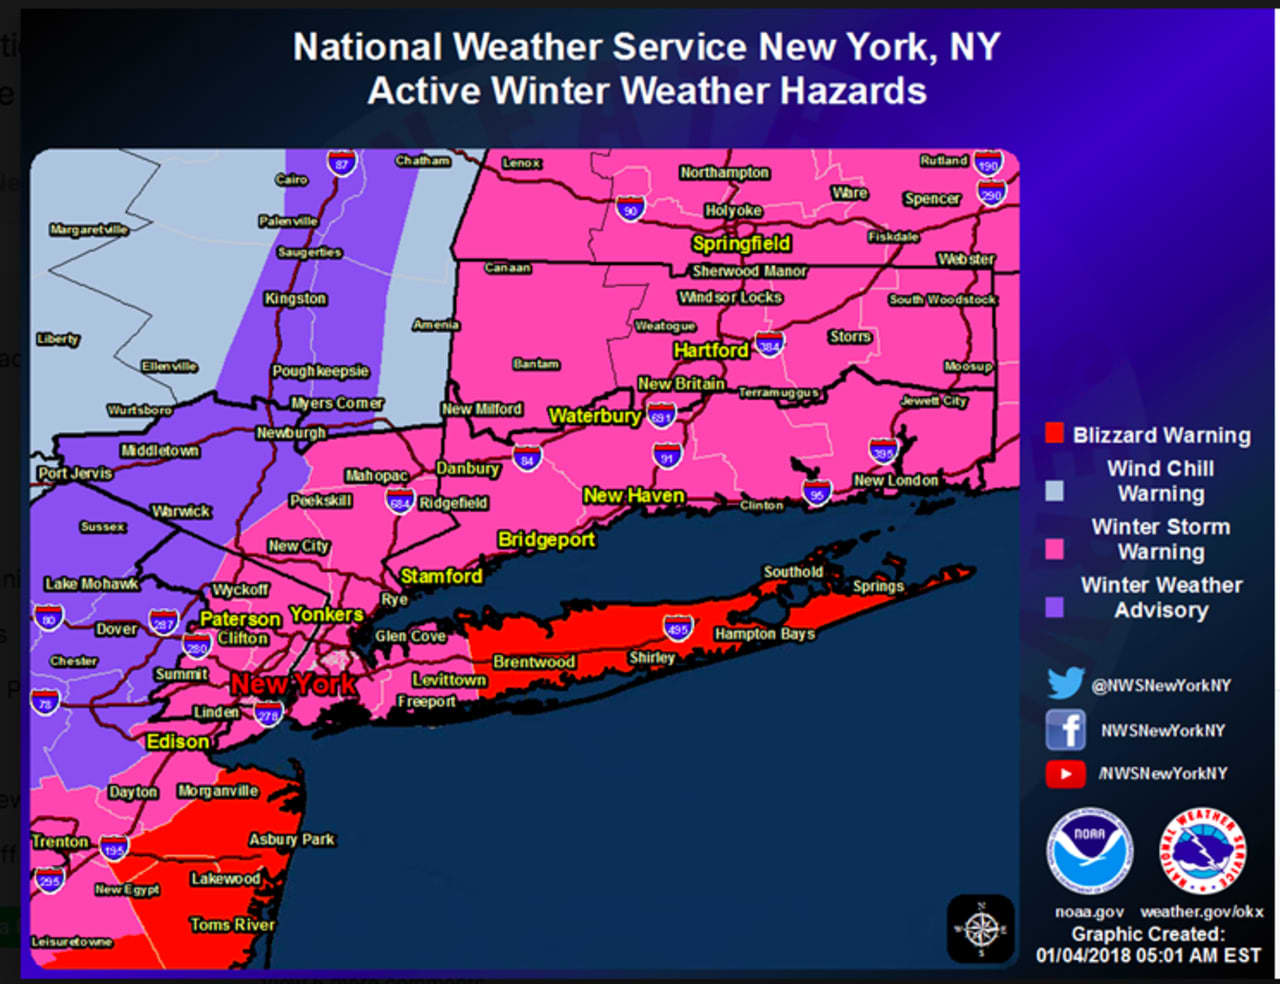 A look at Winter Weather Warnings and Advisories by county.